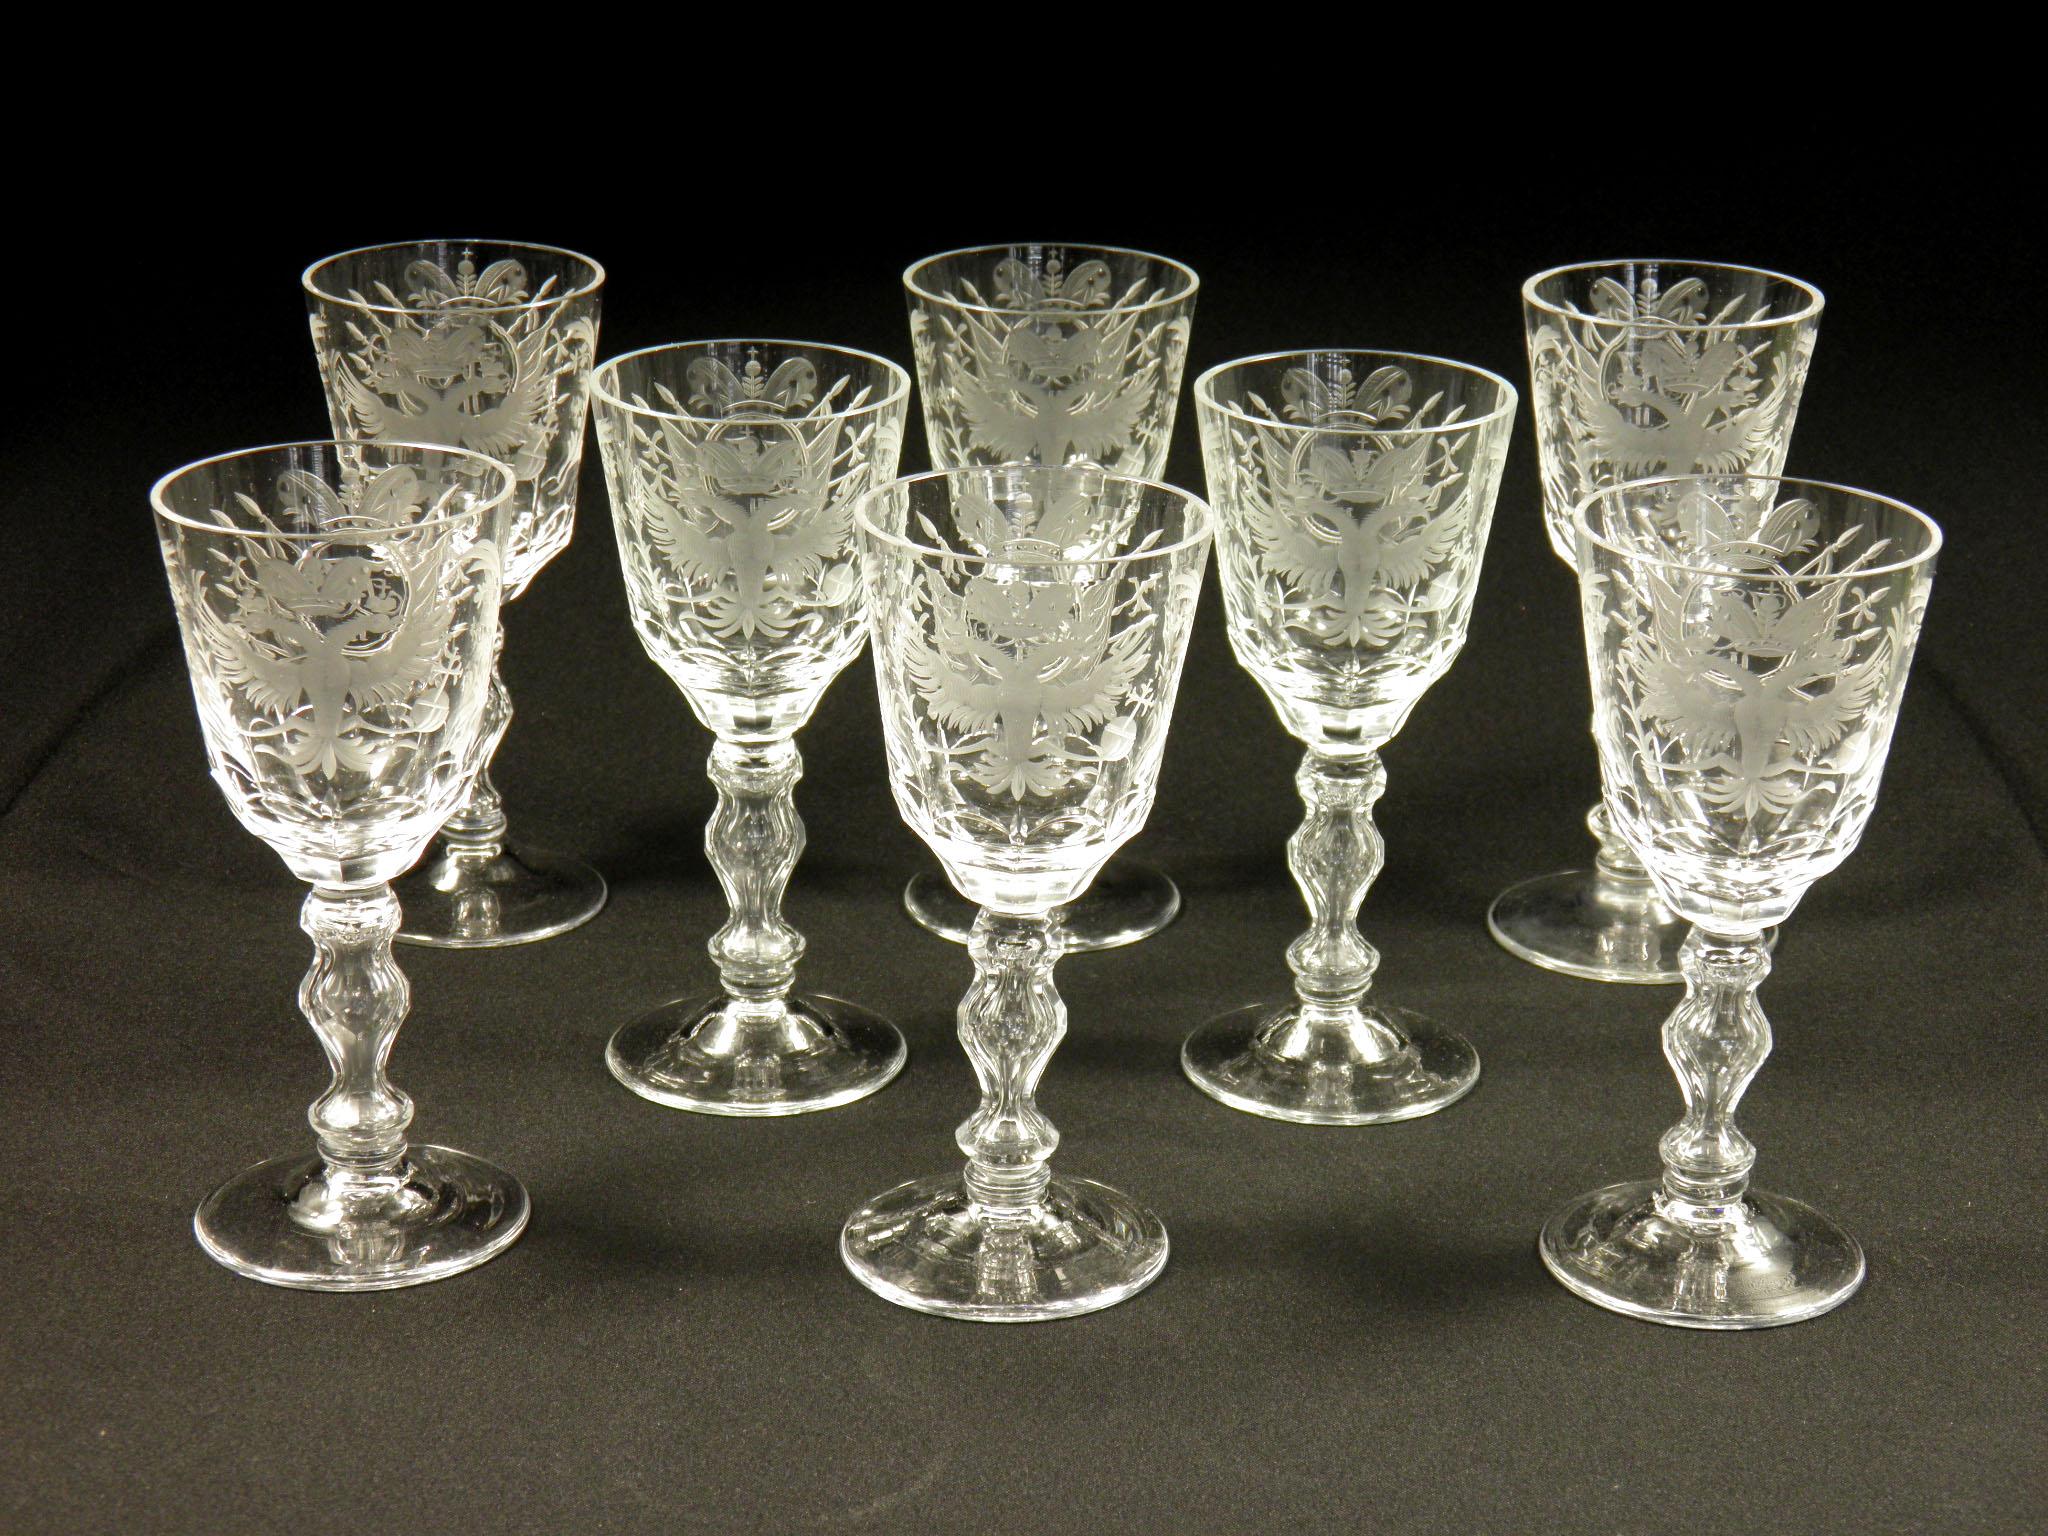 Set of 8+1 wine glasses, hand cut, engraved emblem with monogram, engraved Russian tsarist eagle, probably made in Russia in the 20th century The glasses are in perfect order, without damage – undamaged.
 